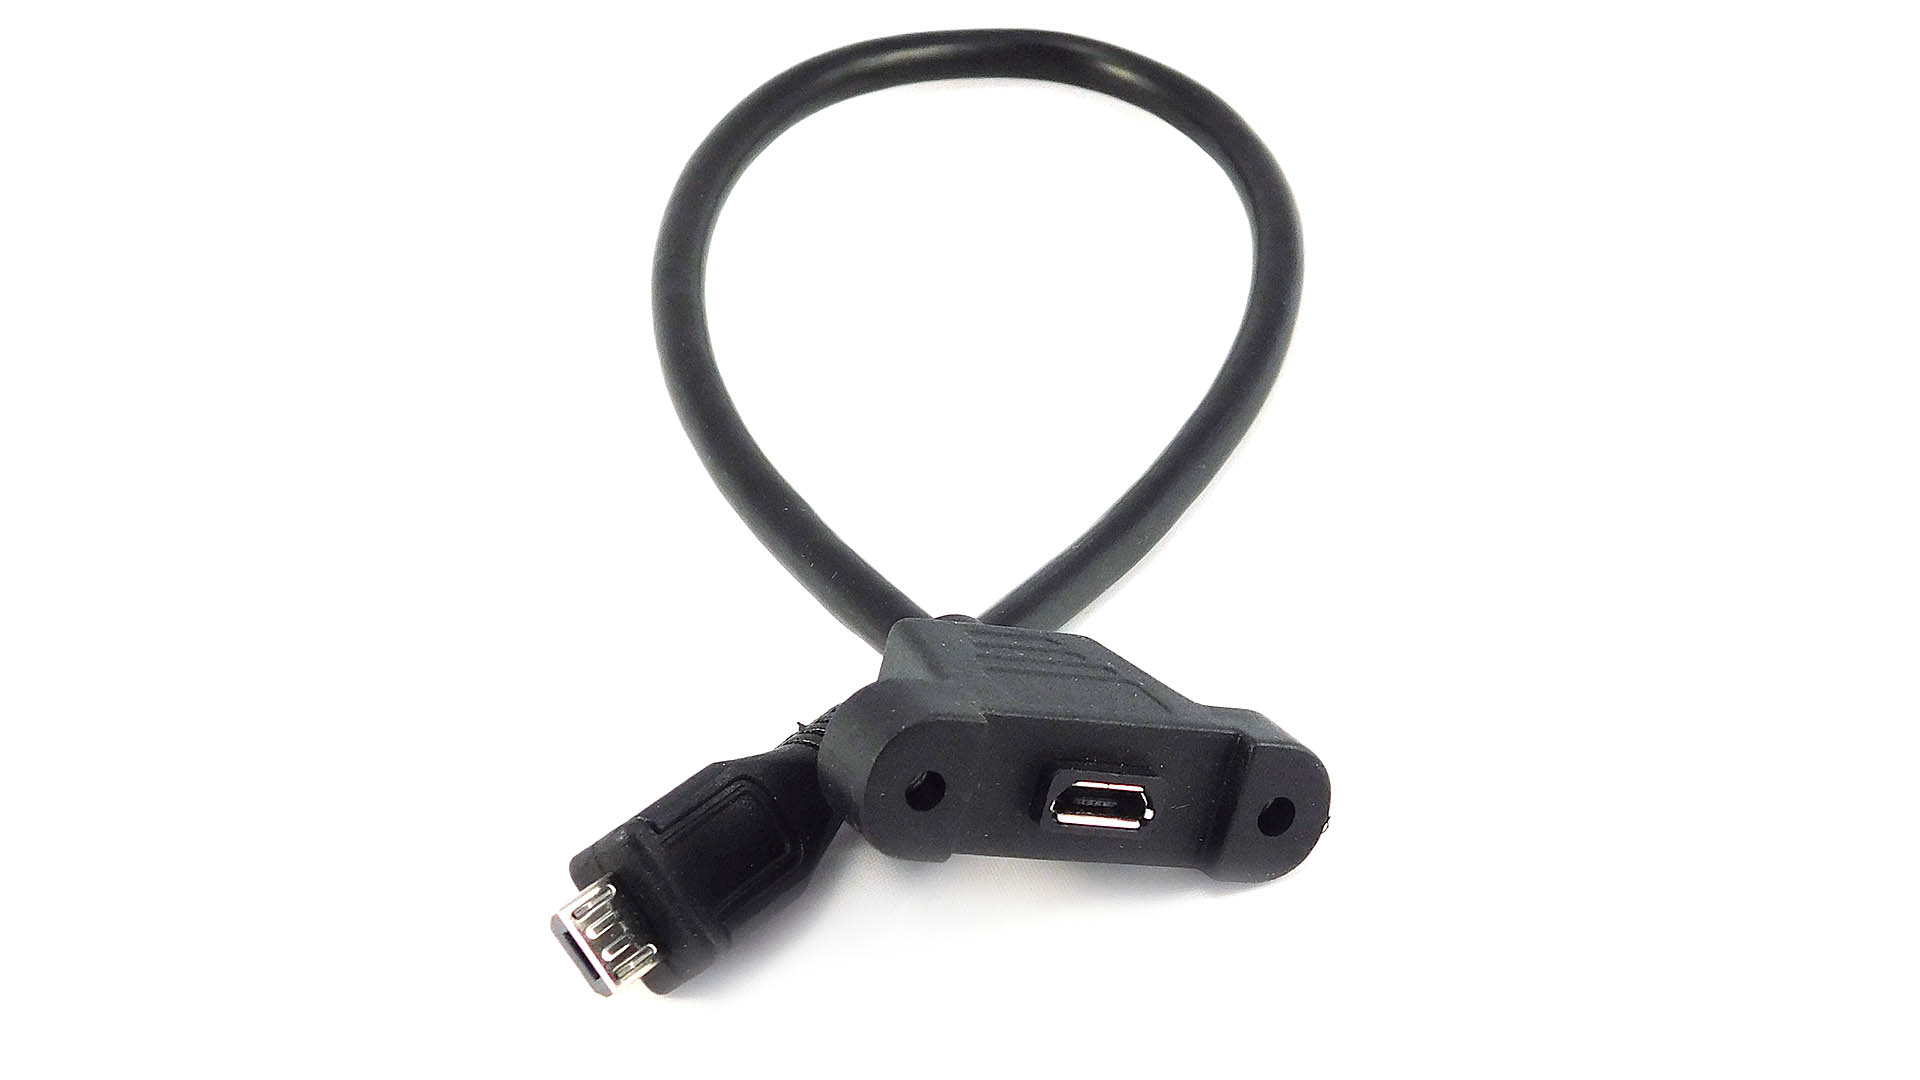 usb micro b extension cable